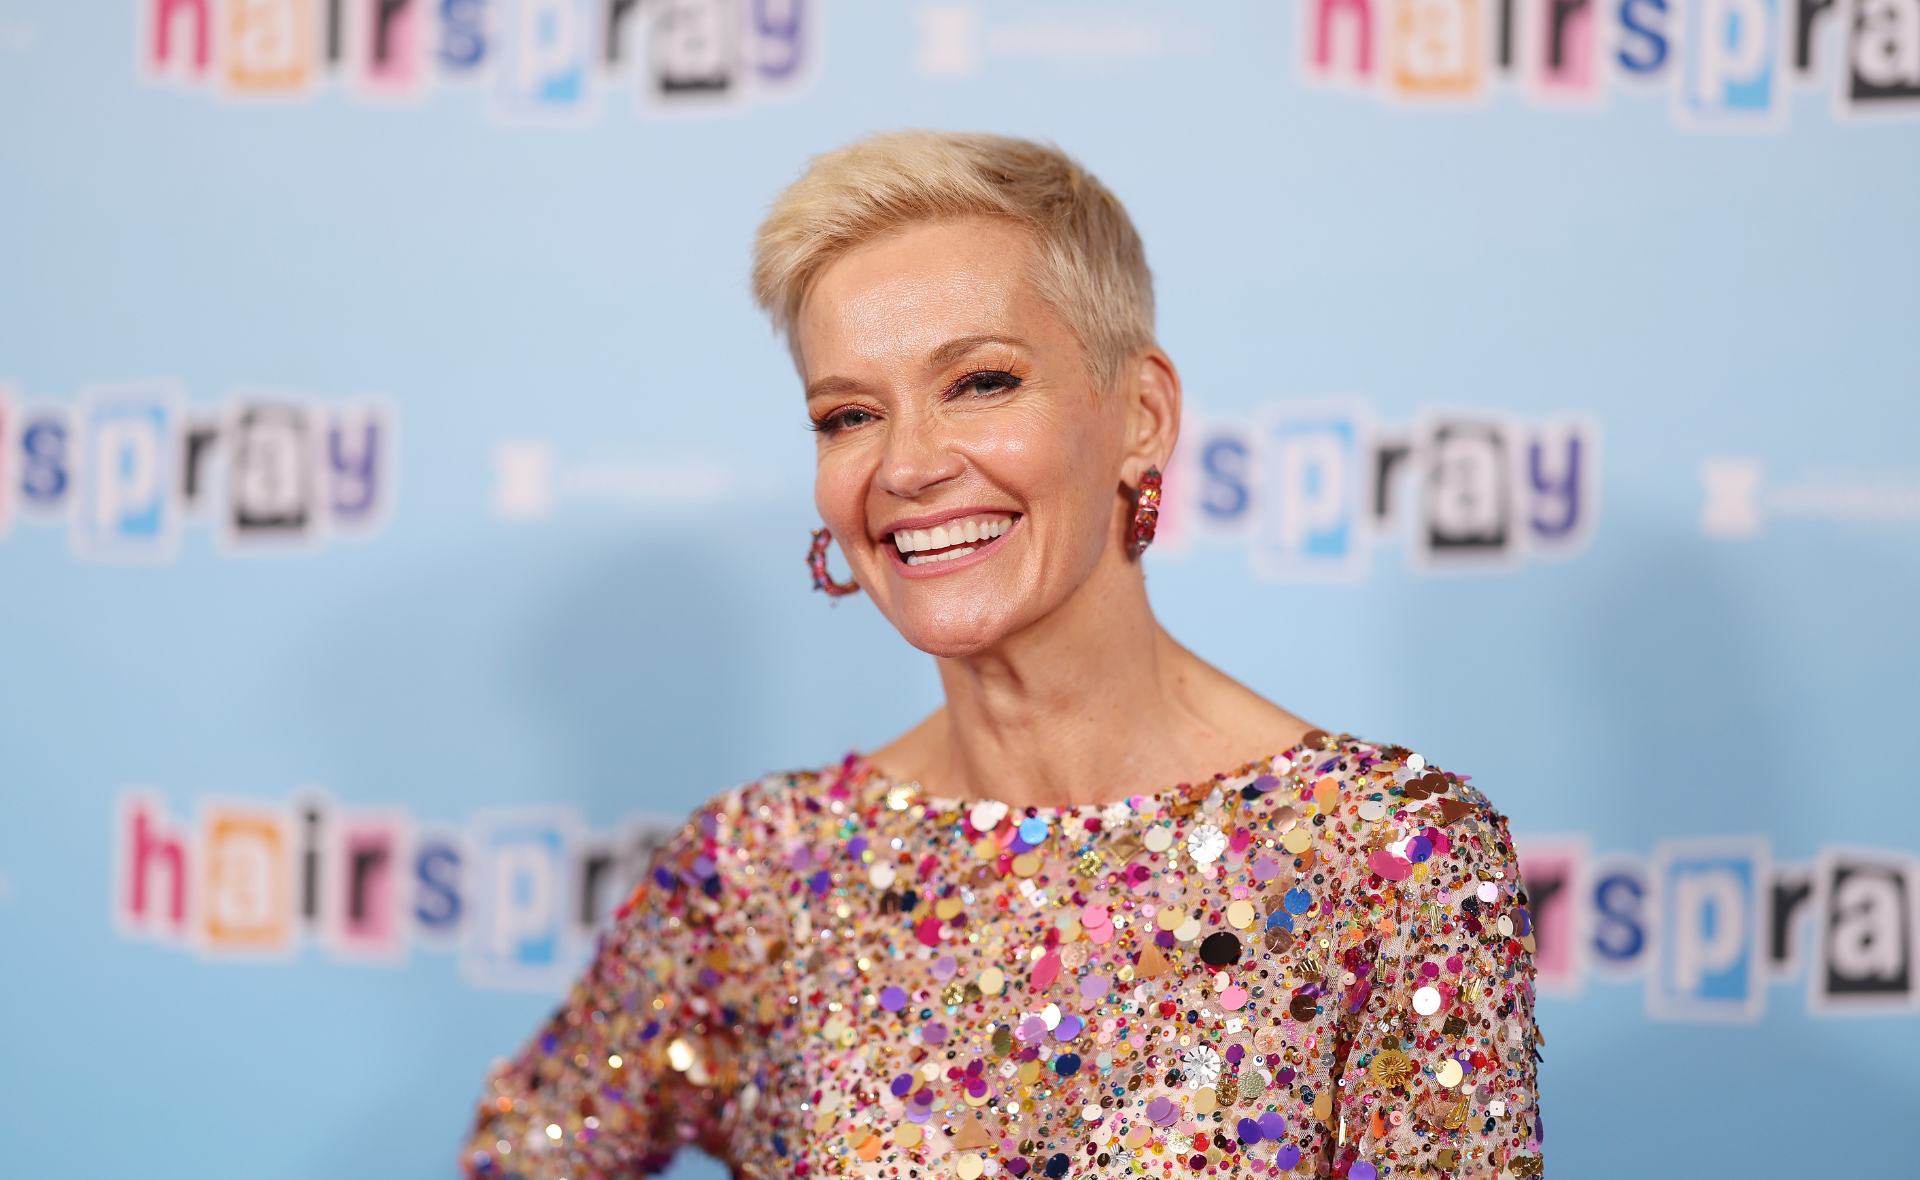 Author Jessica Rowe shares a heart-warming message to her 16-year-old self